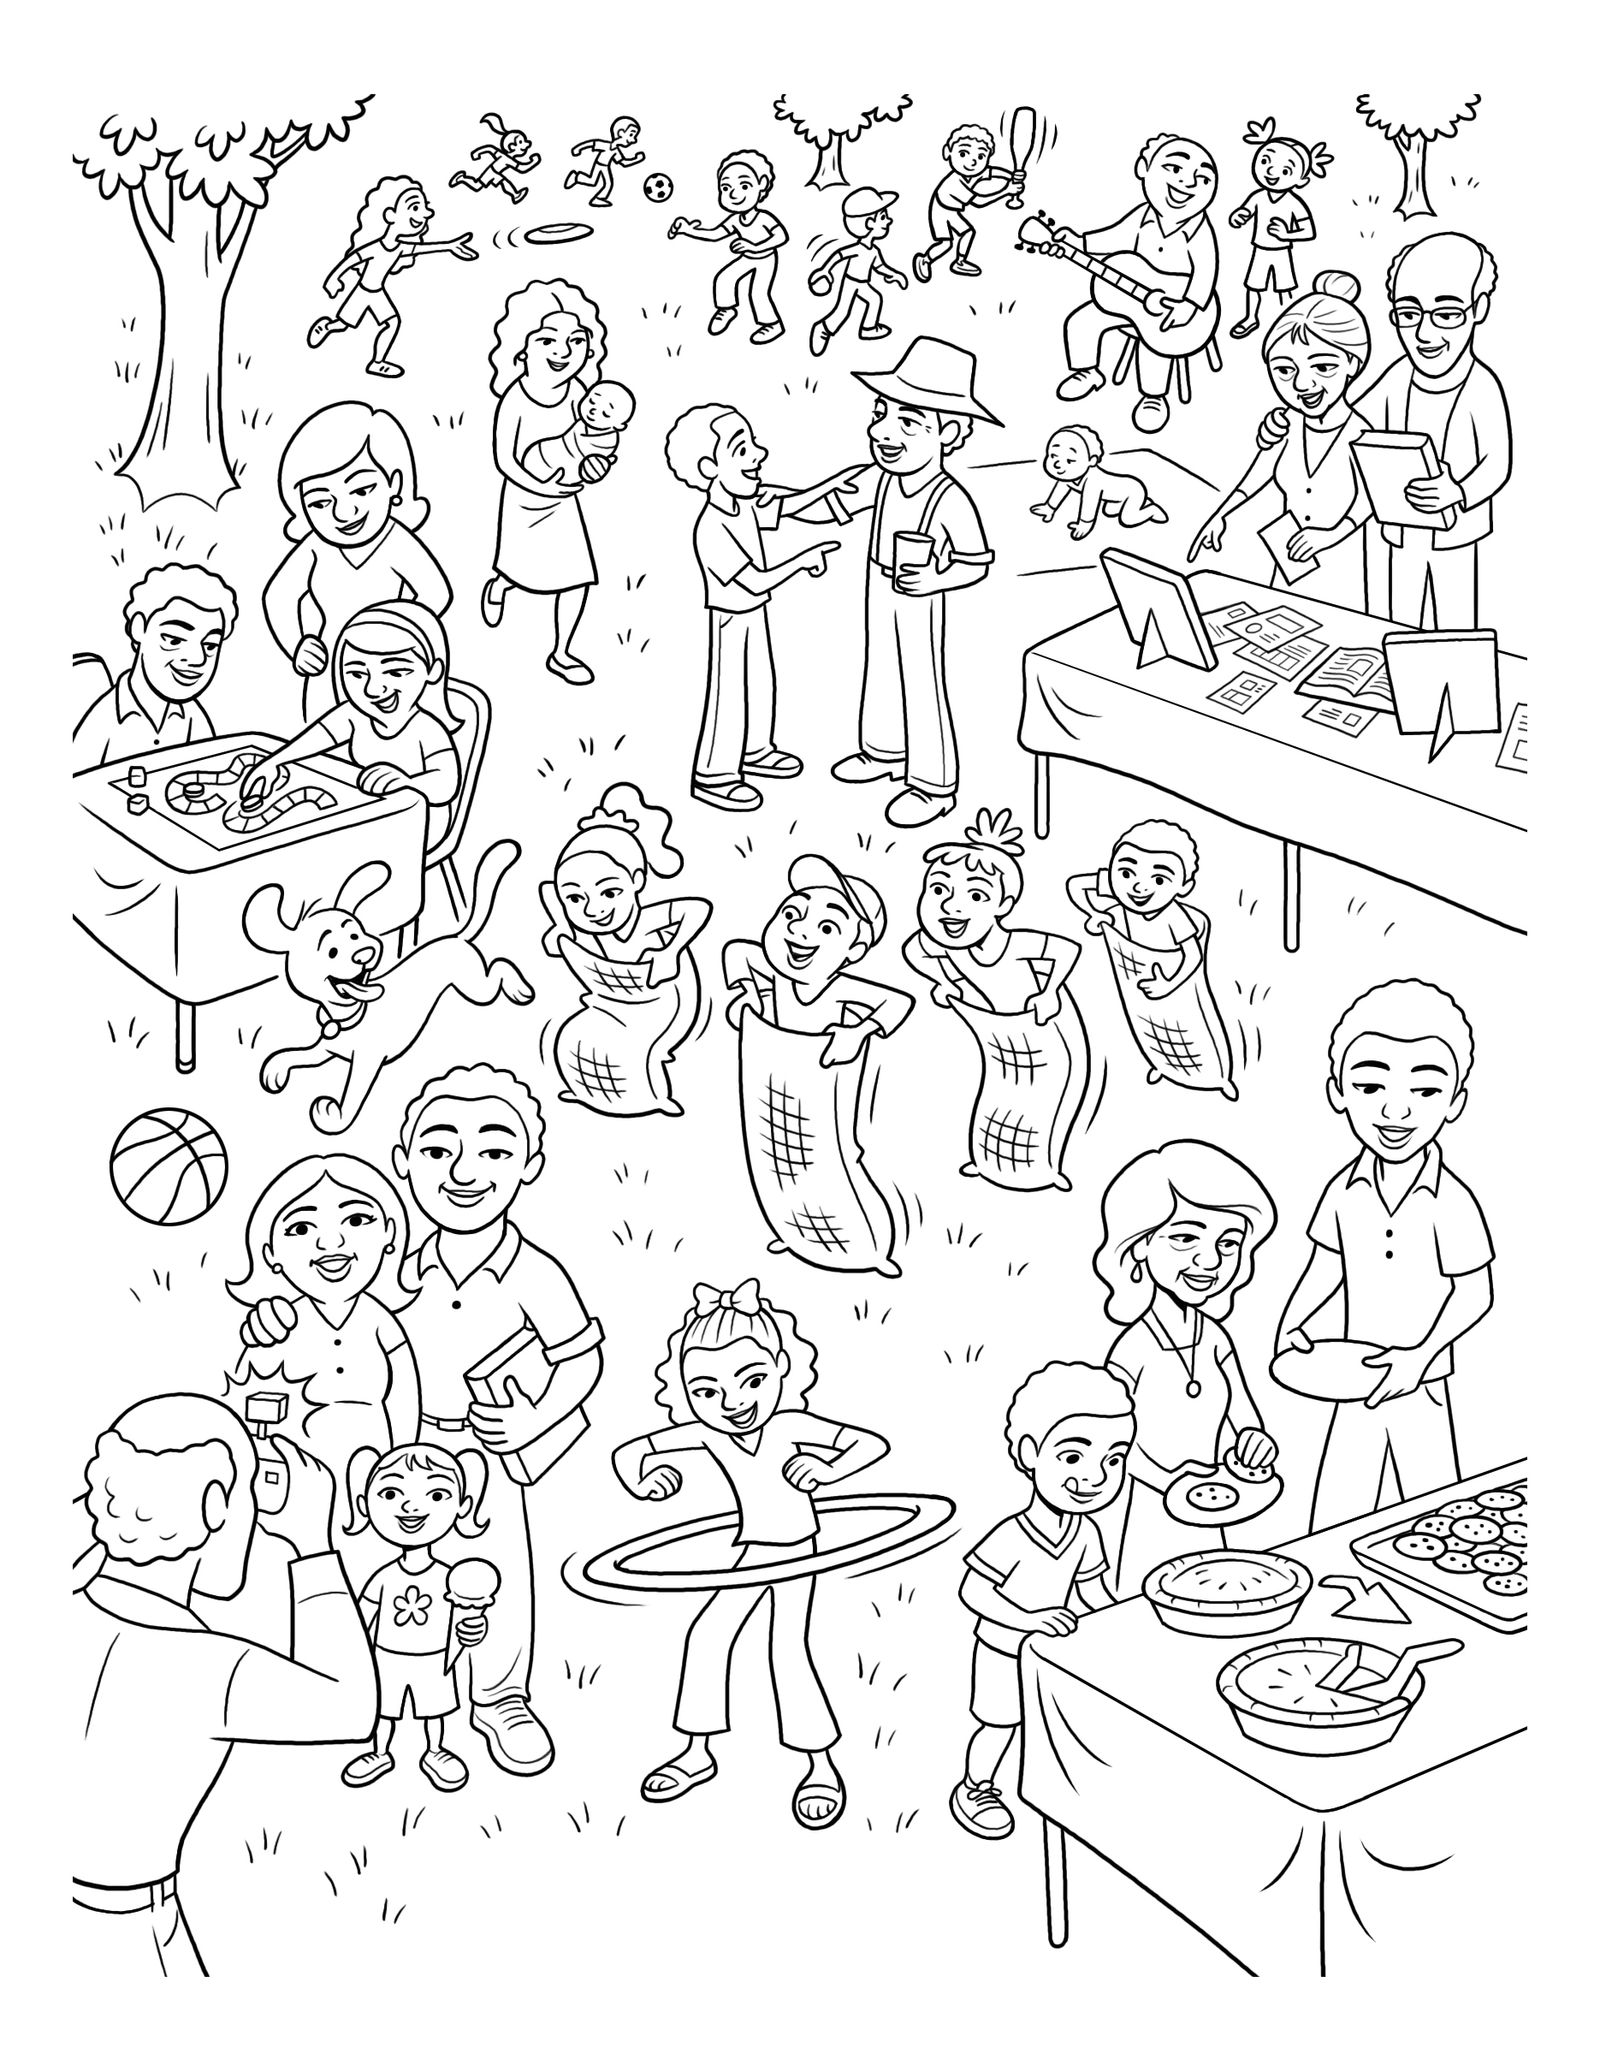 A large extended family gathers together for games and a barbeque.